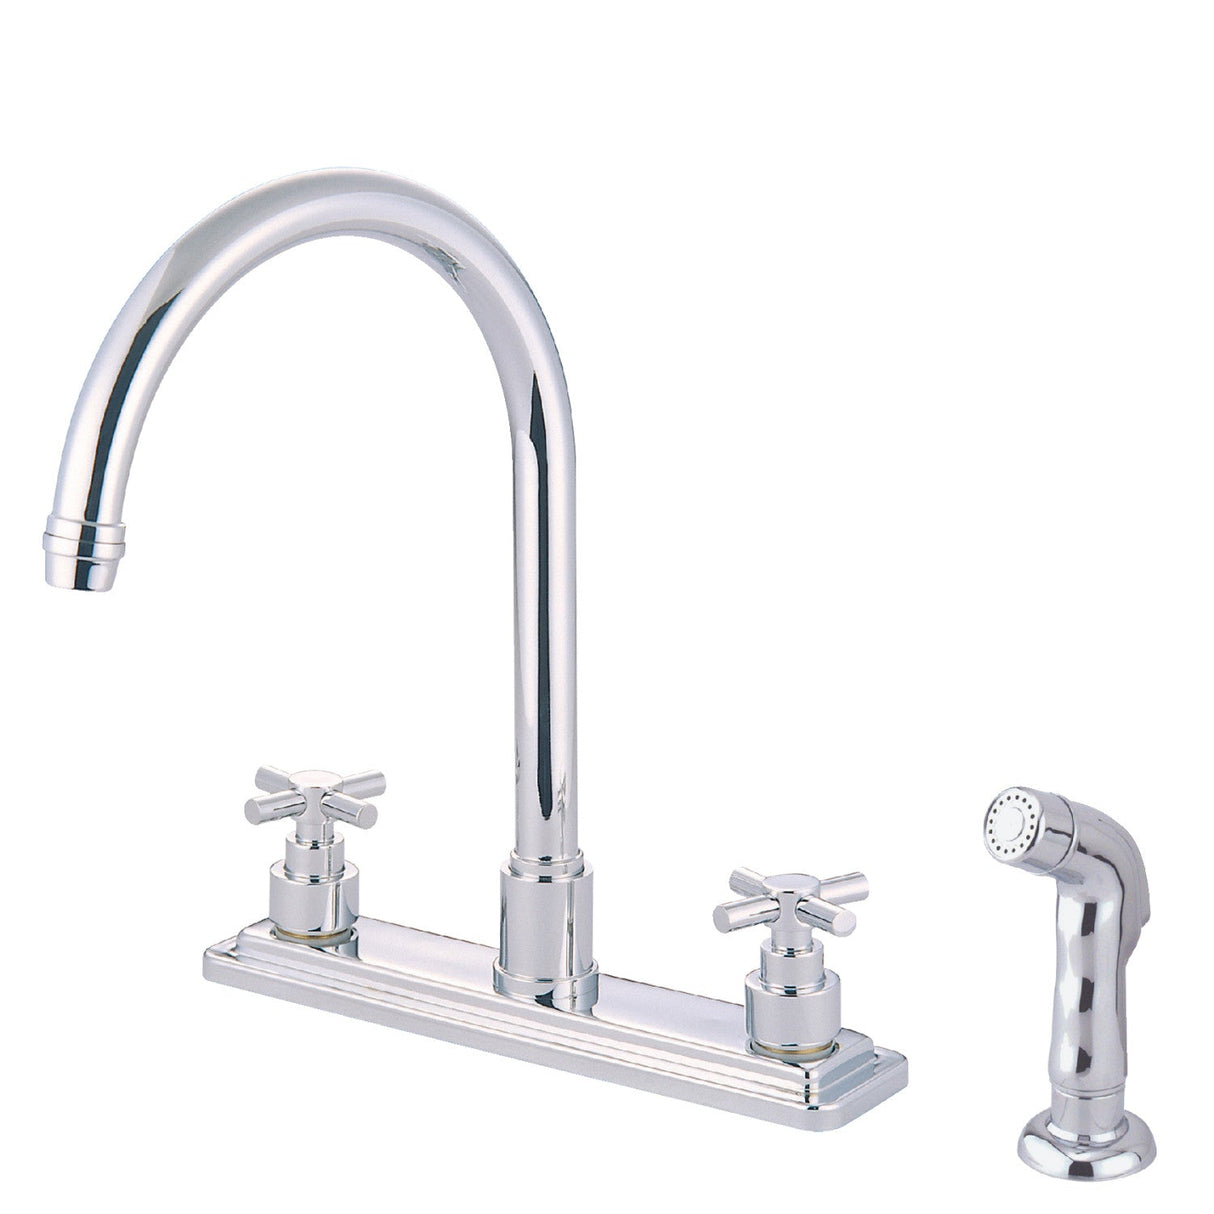 KS8791EX Two-Handle 4-Hole Deck Mount 8" Centerset Kitchen Faucet with Side Sprayer, Polished Chrome